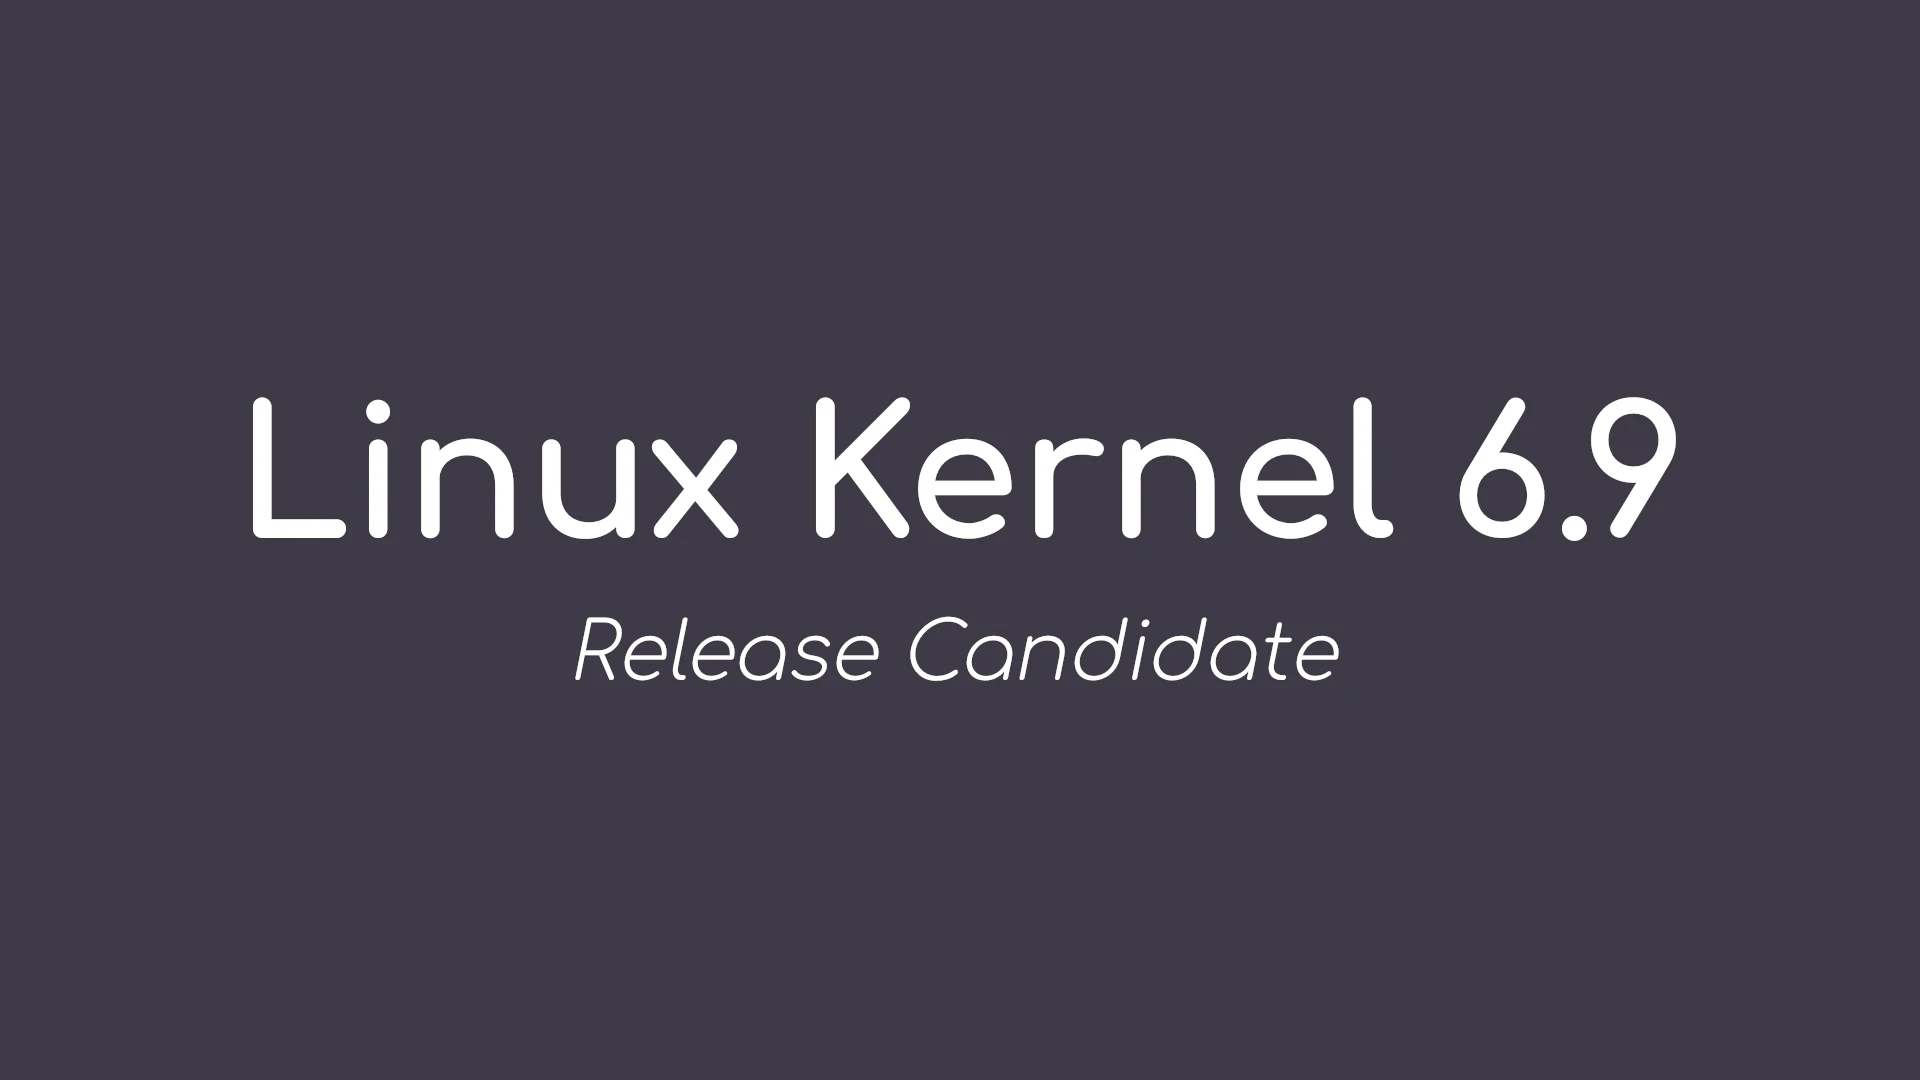 Linus Torvalds Announces the First Linux Kernel 6.9 Release Candidate